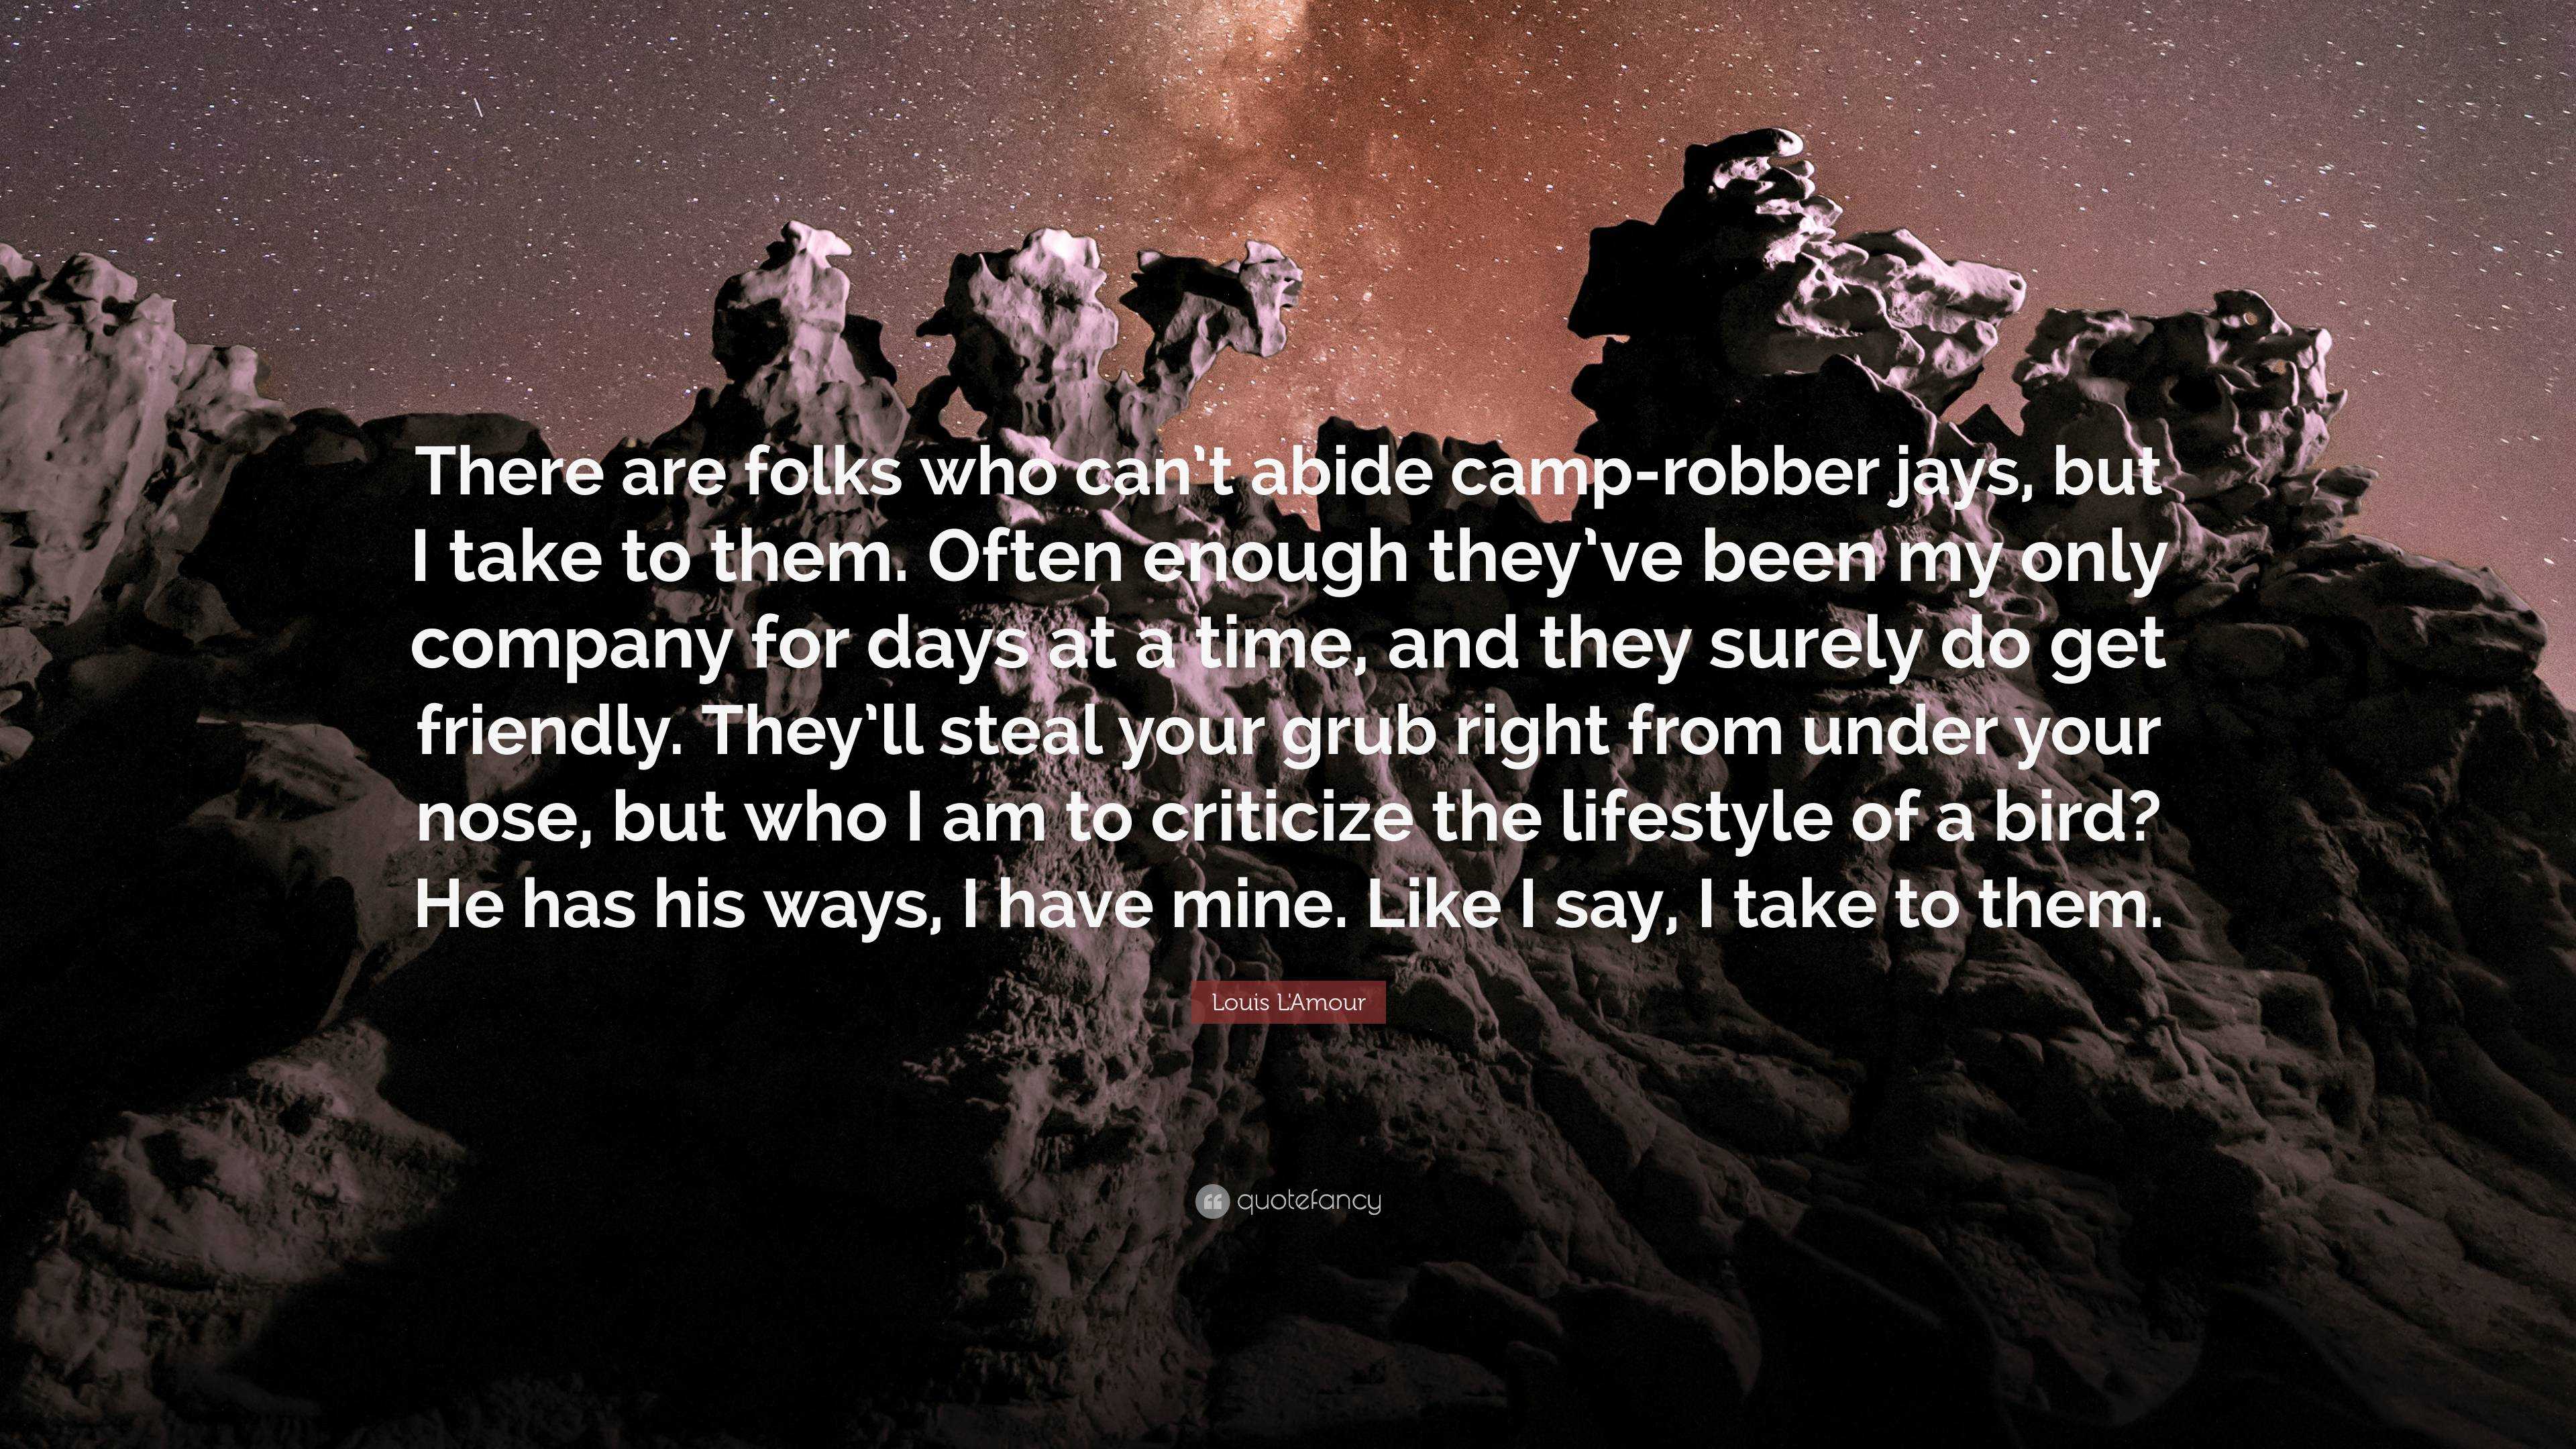 Louis L'Amour Quote: “There are folks who can’t abide camp-robber jays ...